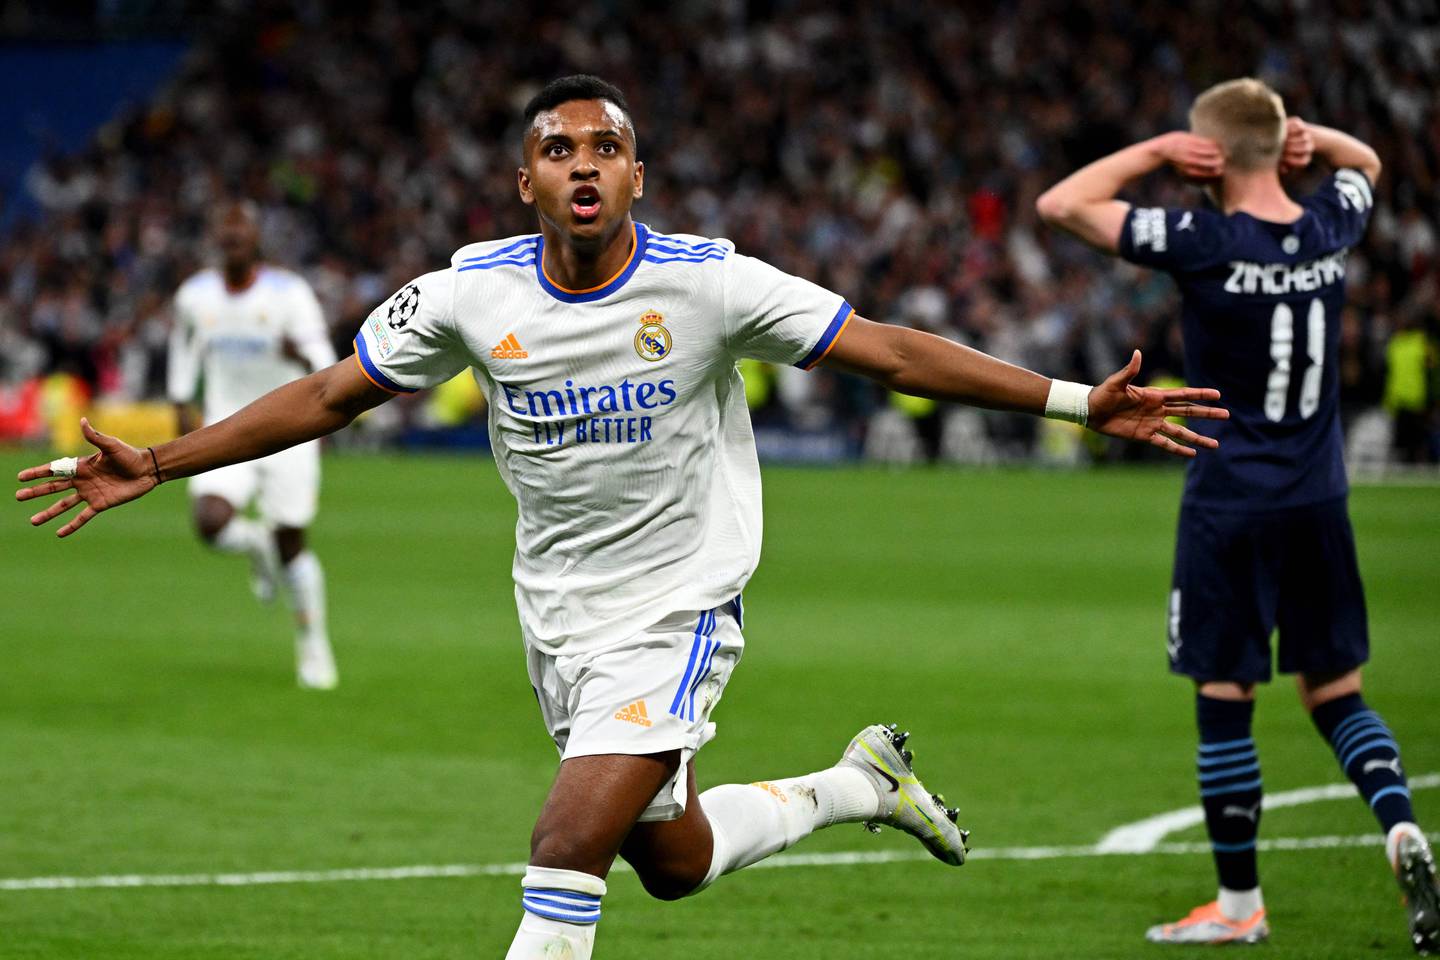 Real Madrid's Rodrygo celebrates his first goal in the Champions League semi-final second leg against Manchester City at the Santiago Bernabeu in Madrid on May 4, 2022. Madrid won the game 3-1 after extra time, clinching a dramatic 6-5 aggregate victory in the tie. AFP